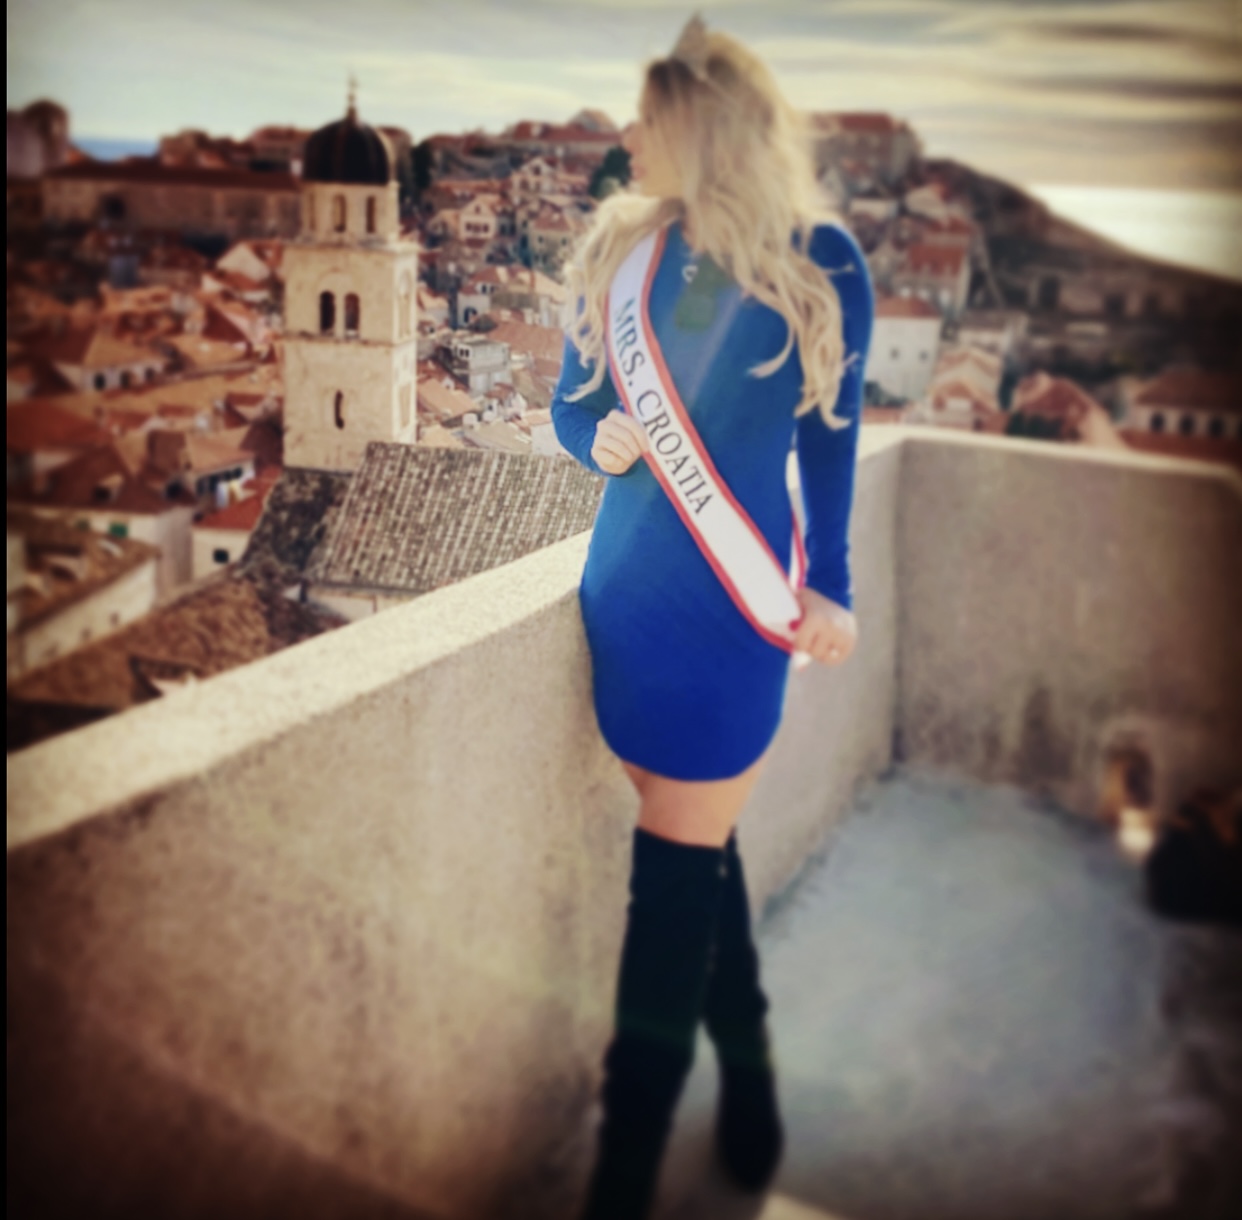 From California to Dubrovnik to representing Croatia at Mrs. World 